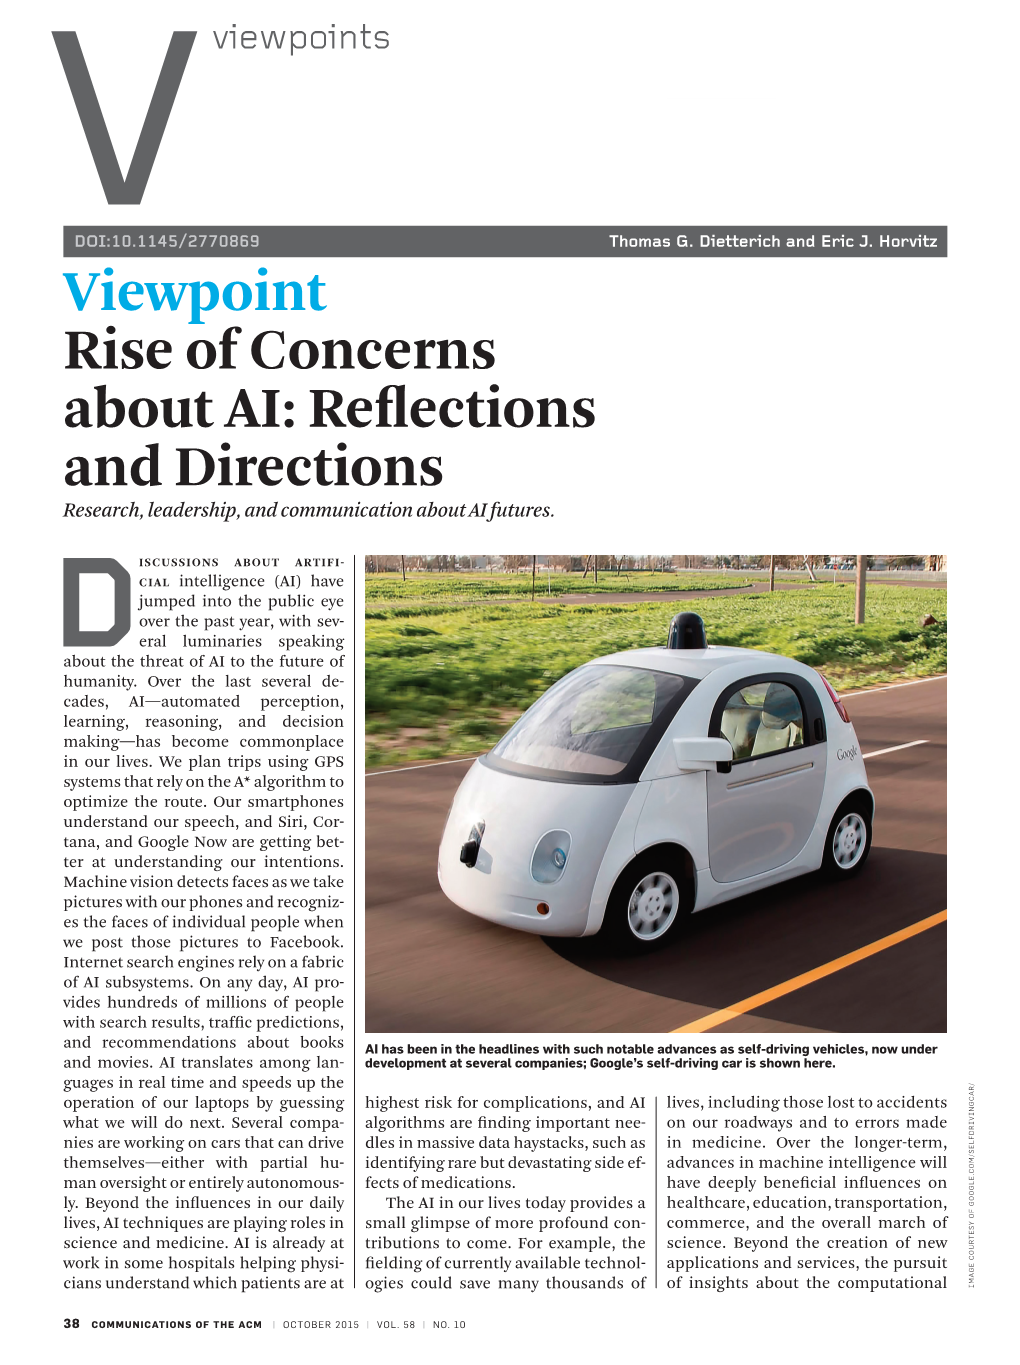 Viewpoint Rise of Concerns About AI: Reflections and Directions Research, Leadership, and Communication About AI Futures